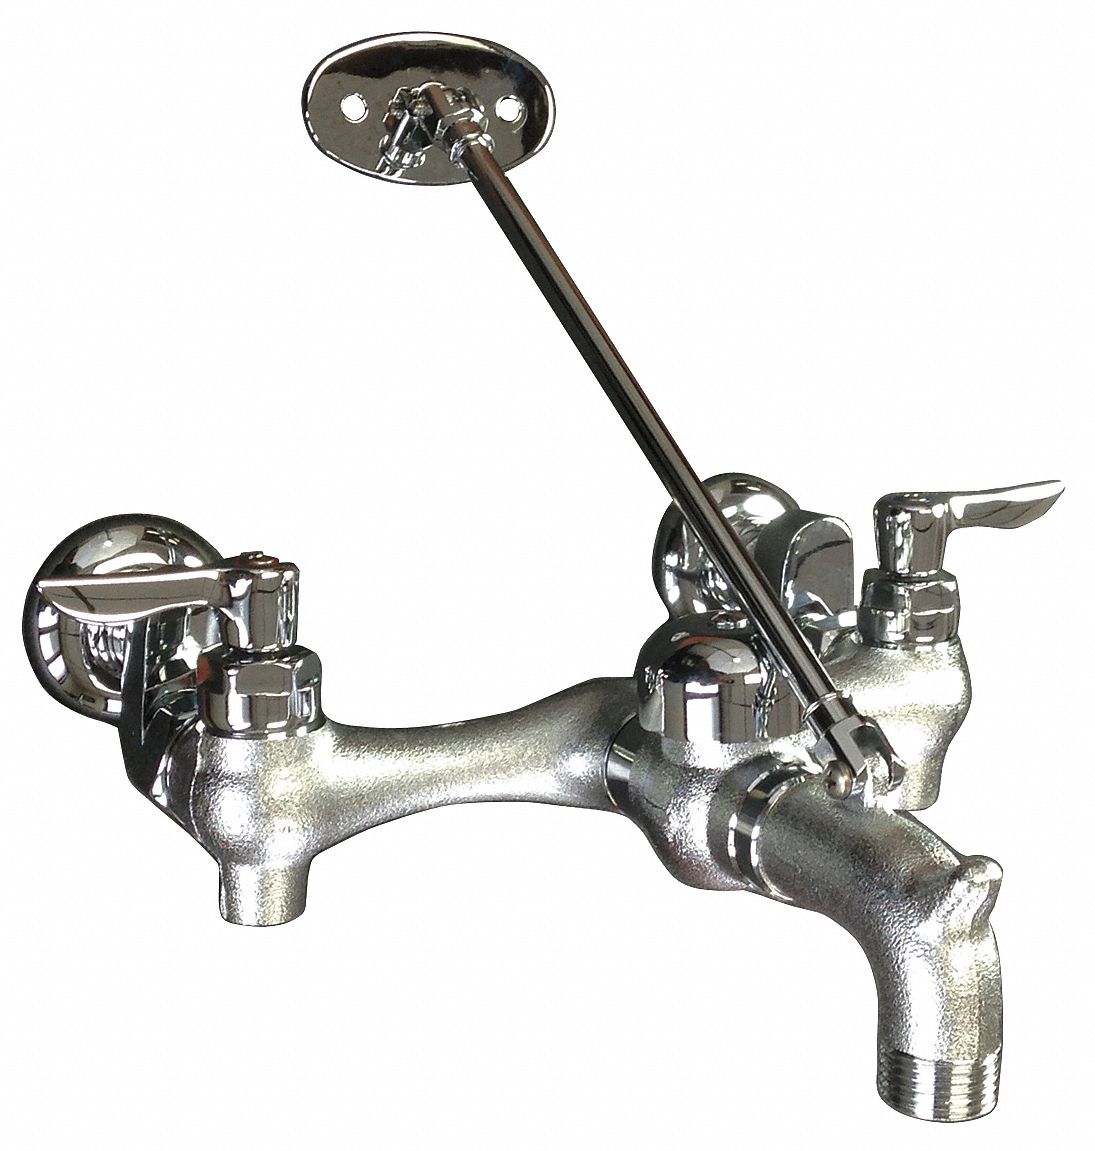 AMERICAN STANDARD Straight Service Sink Faucet, Lever Faucet Handle